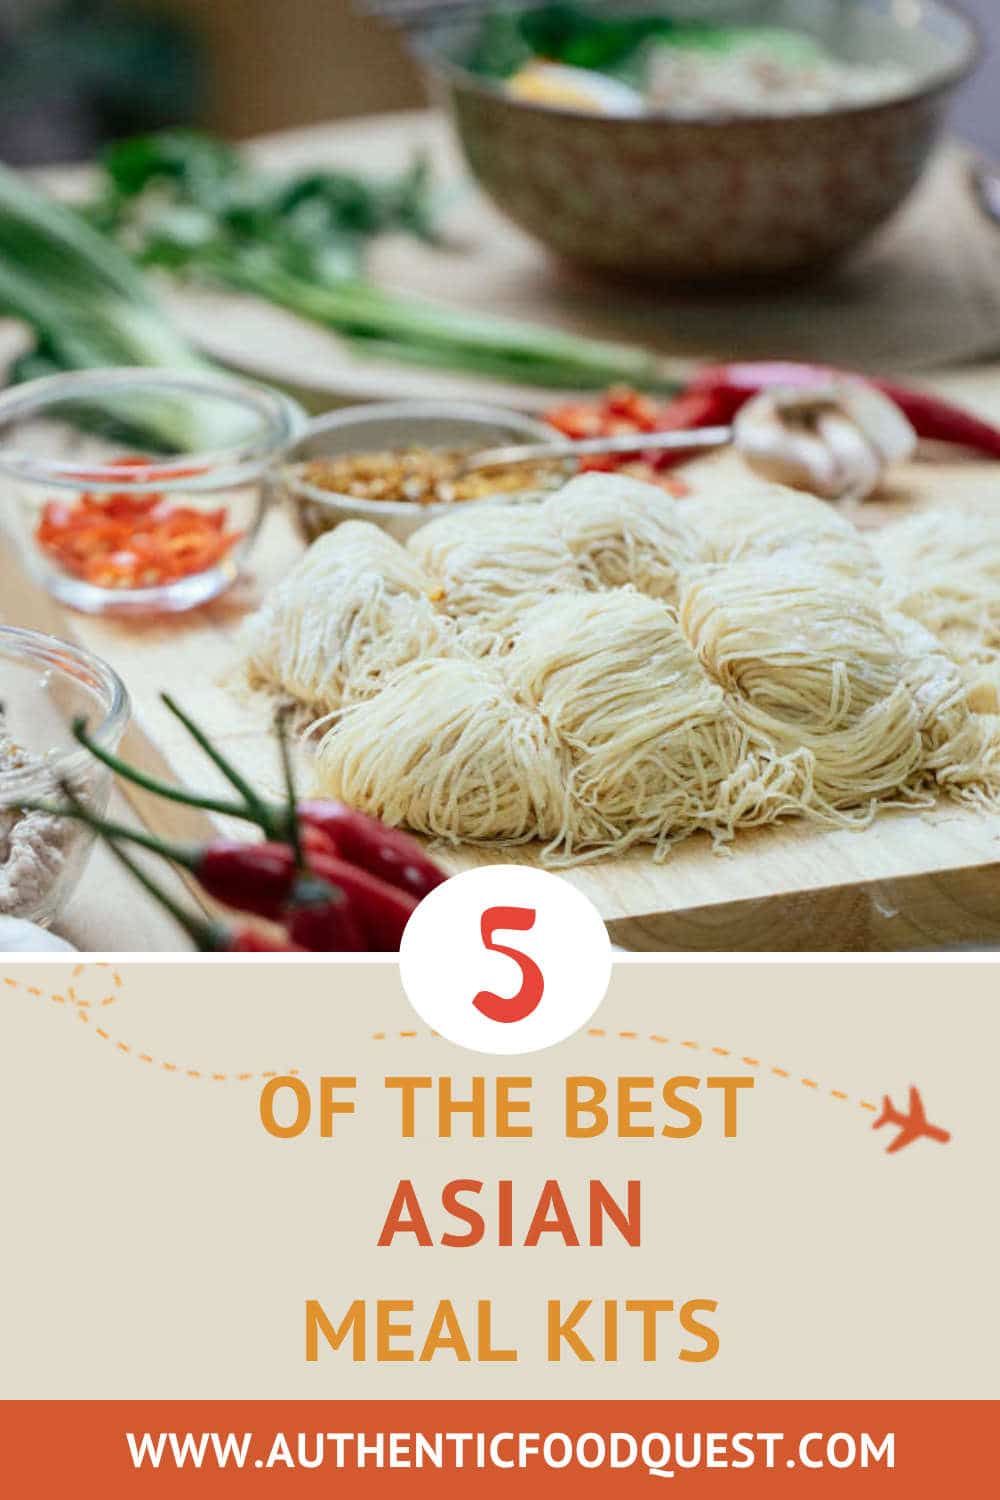 5 Of The Best Asian Meal Kits Delivery For A Taste Of Asia